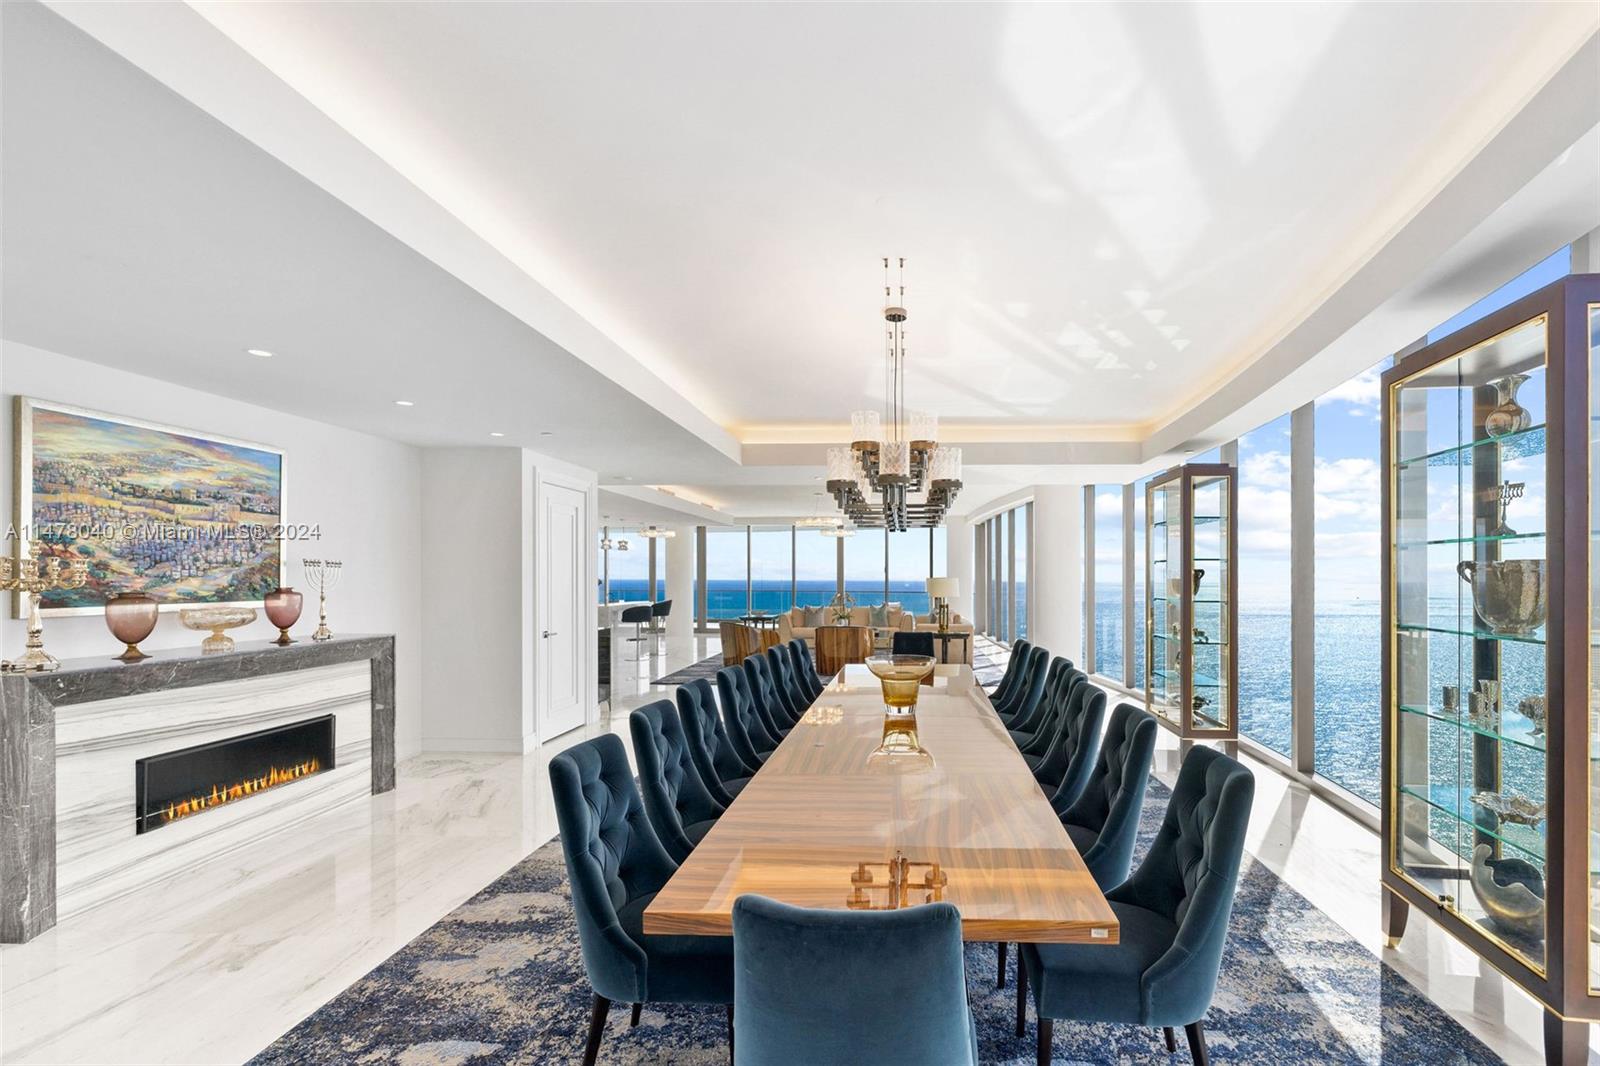 The SKY ESTATE - custom one-of-a-kind full-floor unit is a masterpiece of opulence on the 34th floor of the ultra-luxurious & secure Estates at Acqualina in Sunny Isles Beach. Boasting 10 generously appointed BD & 13 lavishly designed onyx & marble BA, meticulously crafted to cater to those who seek the pinnacle of coastal oceanfront living in a full-floor plan designed to ensure utmost privacy & comfort. Primary Suite encompasses the bedroom, substantial bathroom inc 2 showers, 2 lavatories, dry sauna, her closet w ocean views, his closet, sound-insulated music room & an office, both opening onto large ocean-front-facing terrace. Guest Suite facing west features a Living/Dining area w a high-end kitchen, completed at the same level of quality, inc swimming pool on the west-facing terrace.